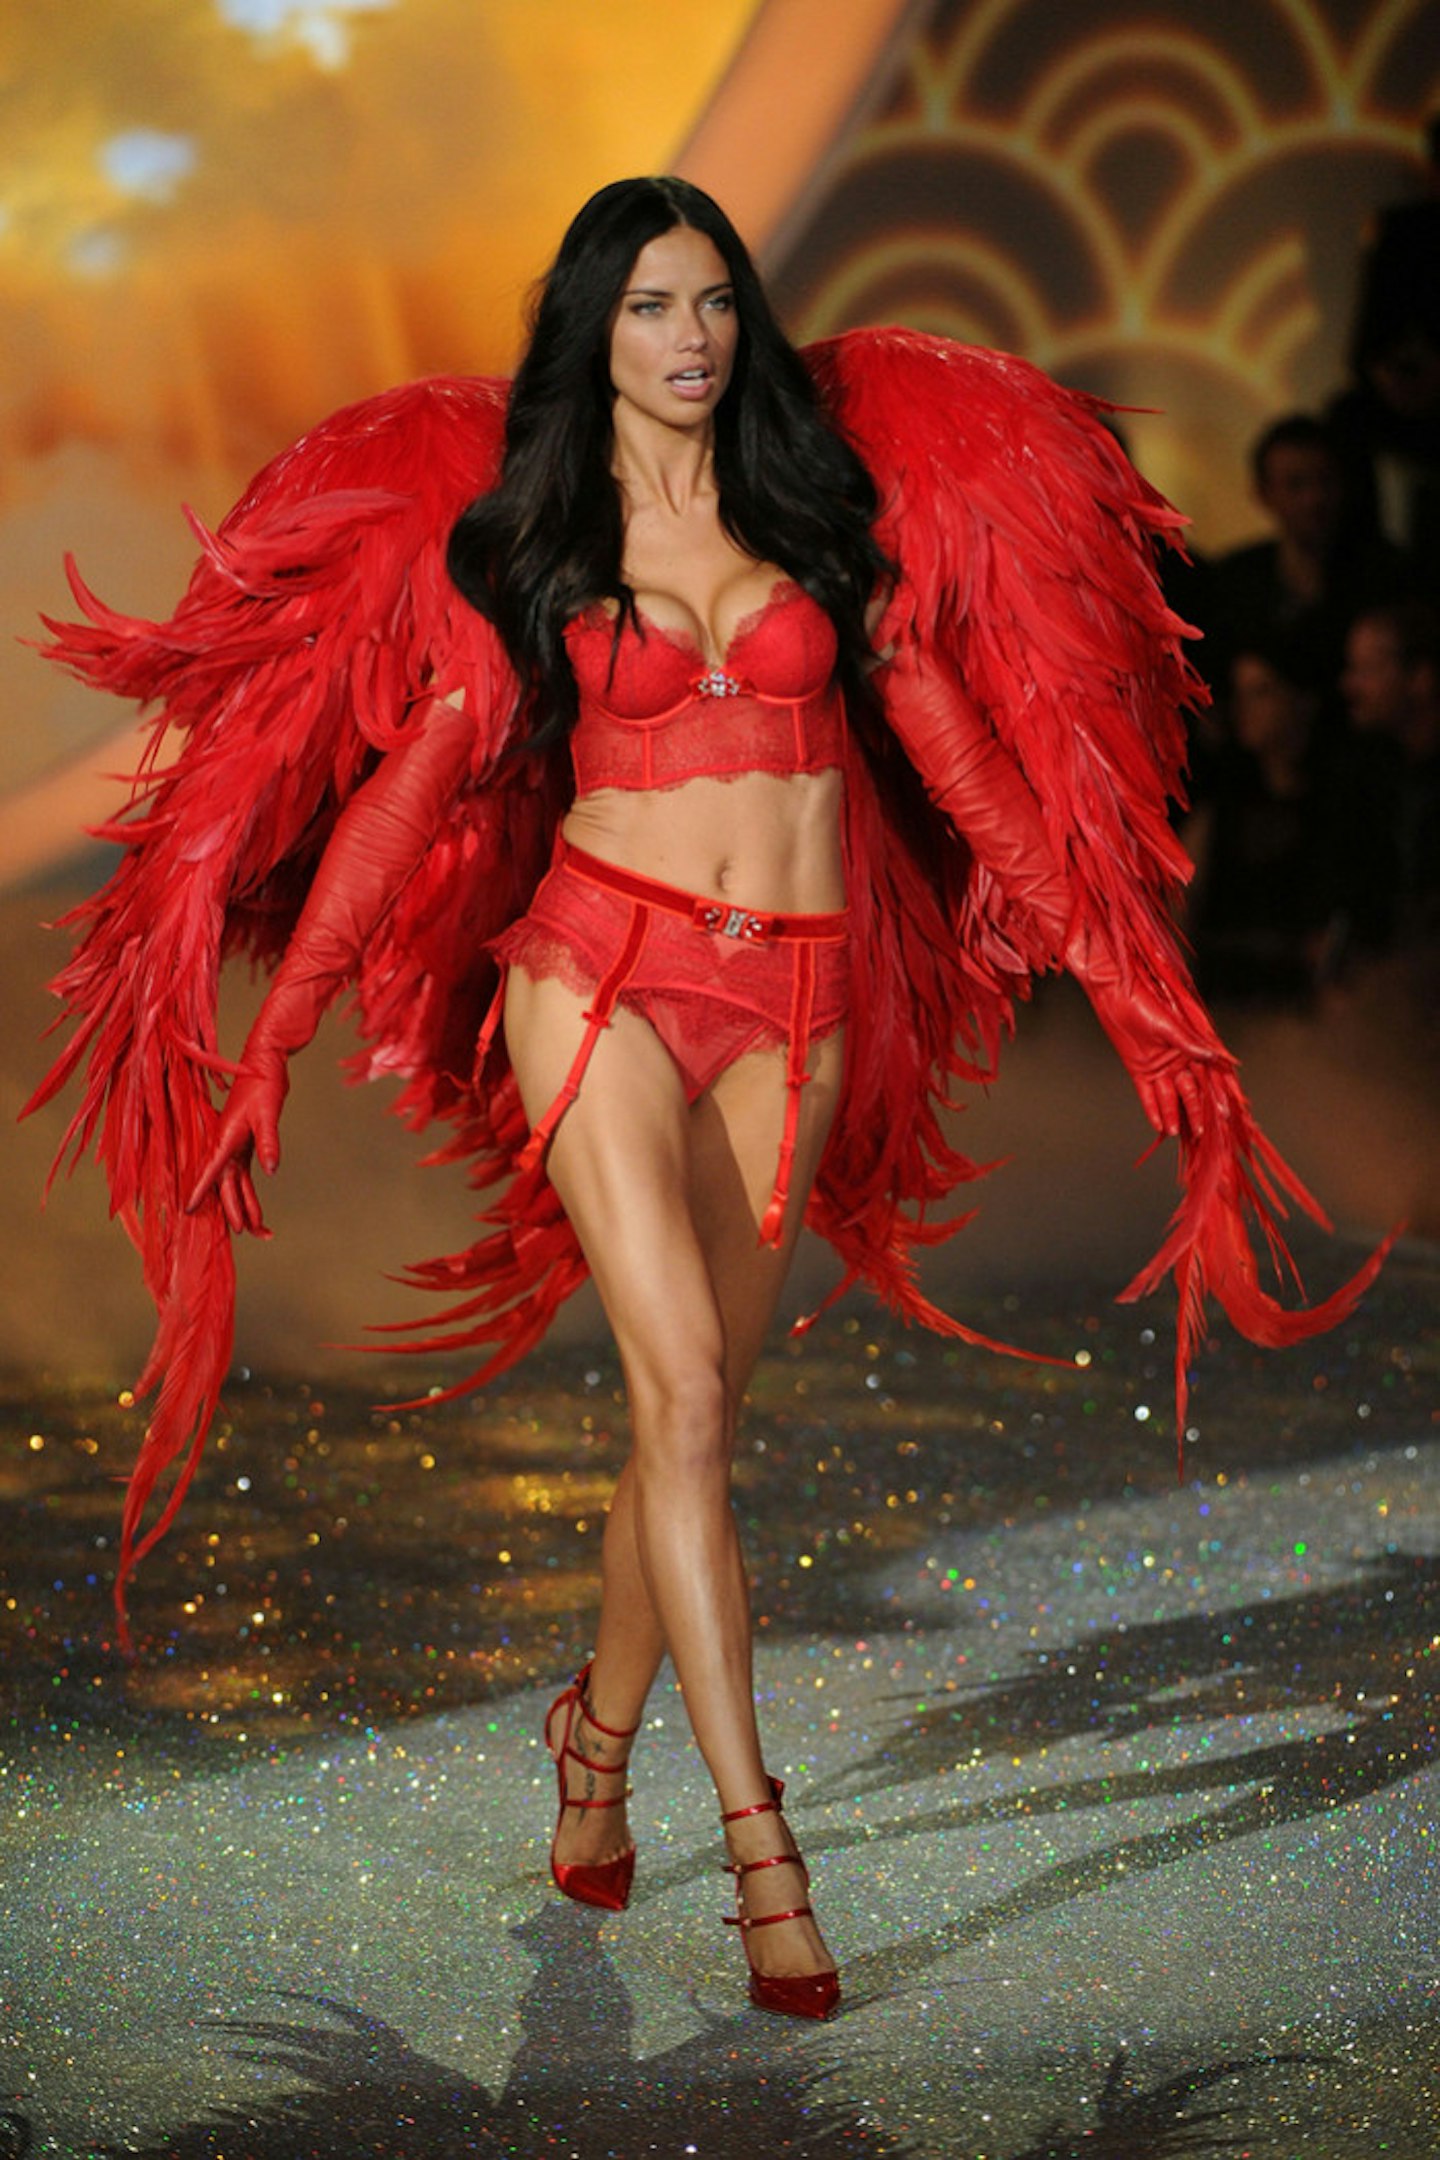 The Most Memorable Victoria's Secret Models of All Time